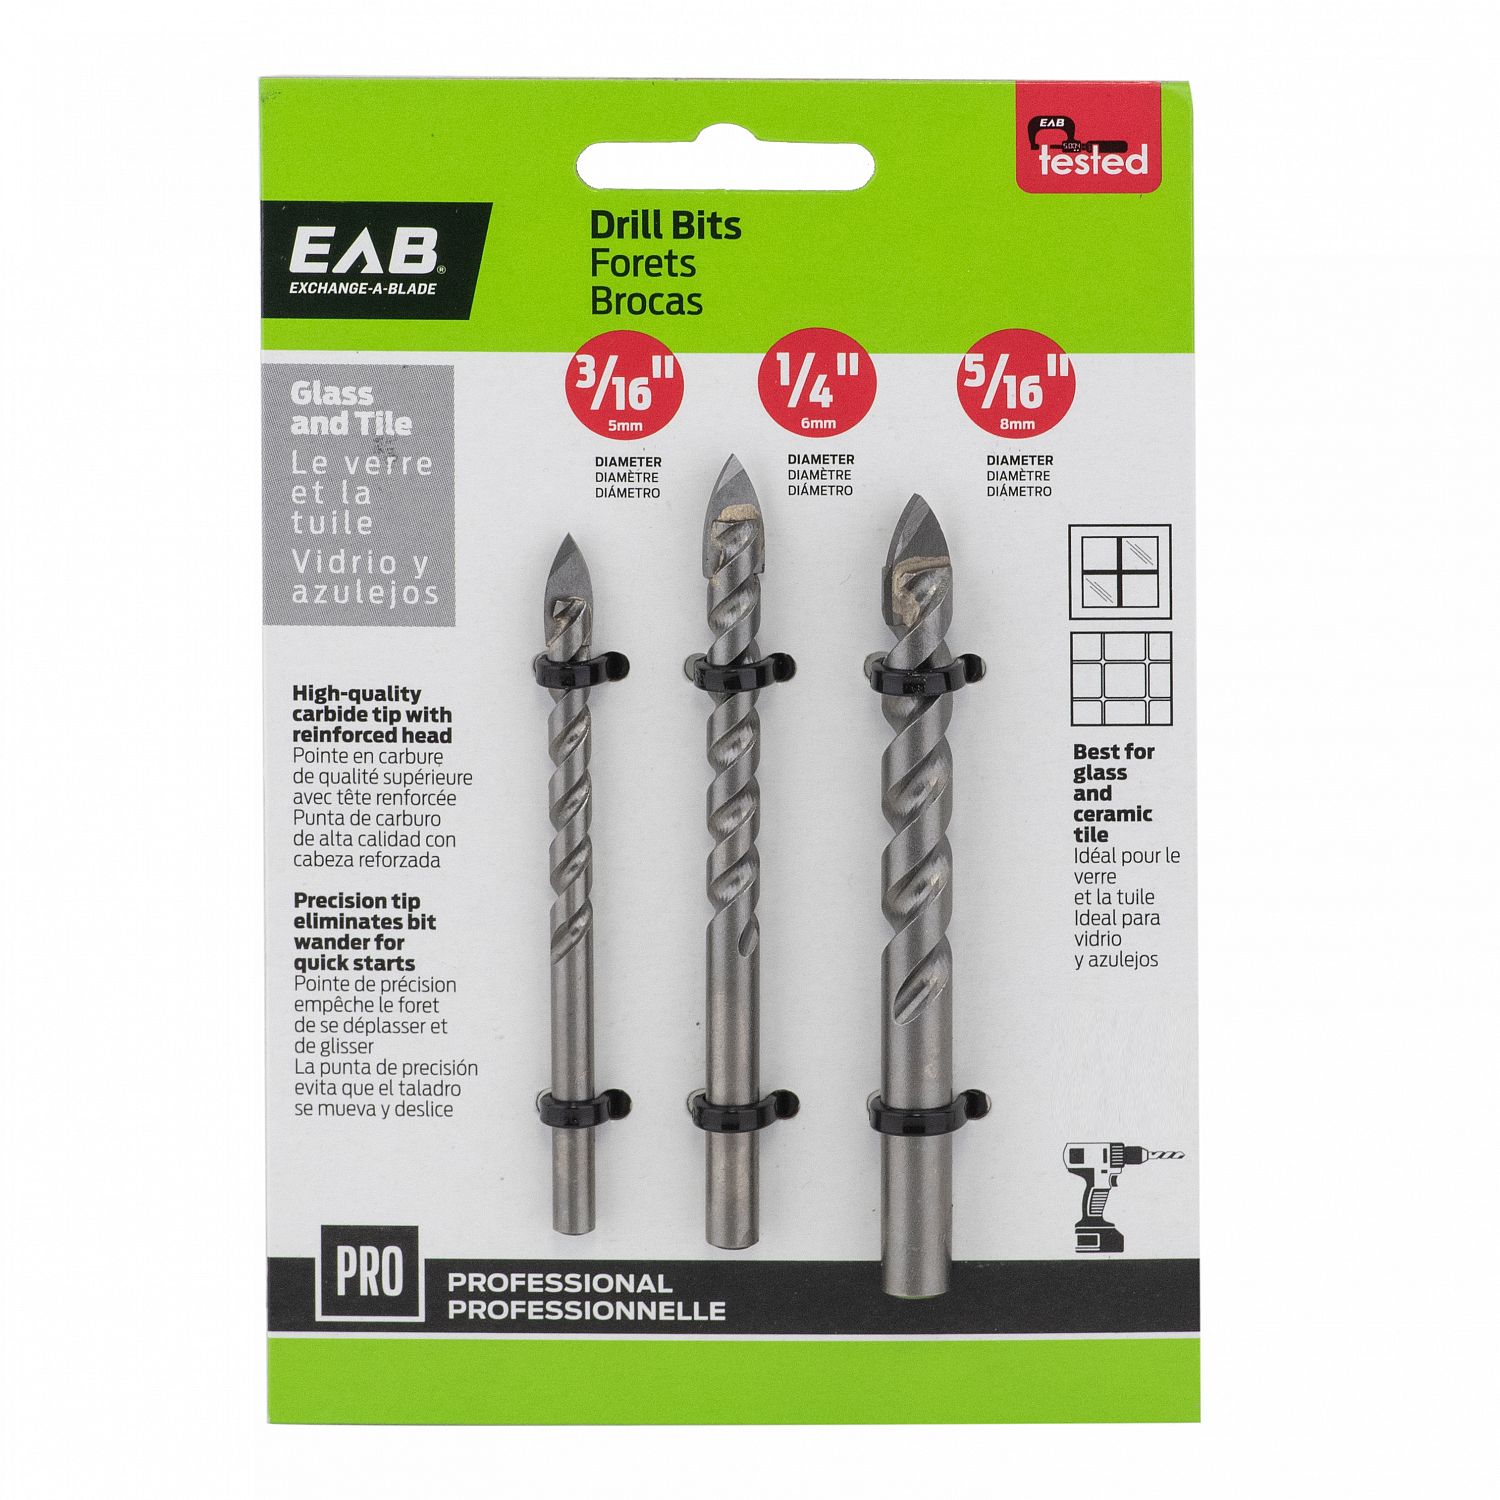 https://www.exchangeablade.com/image/w1500/files/products/exchangeable-glass-and-tile-drill-bit-eab-pro-3pcs-1041372_1-1.jpg